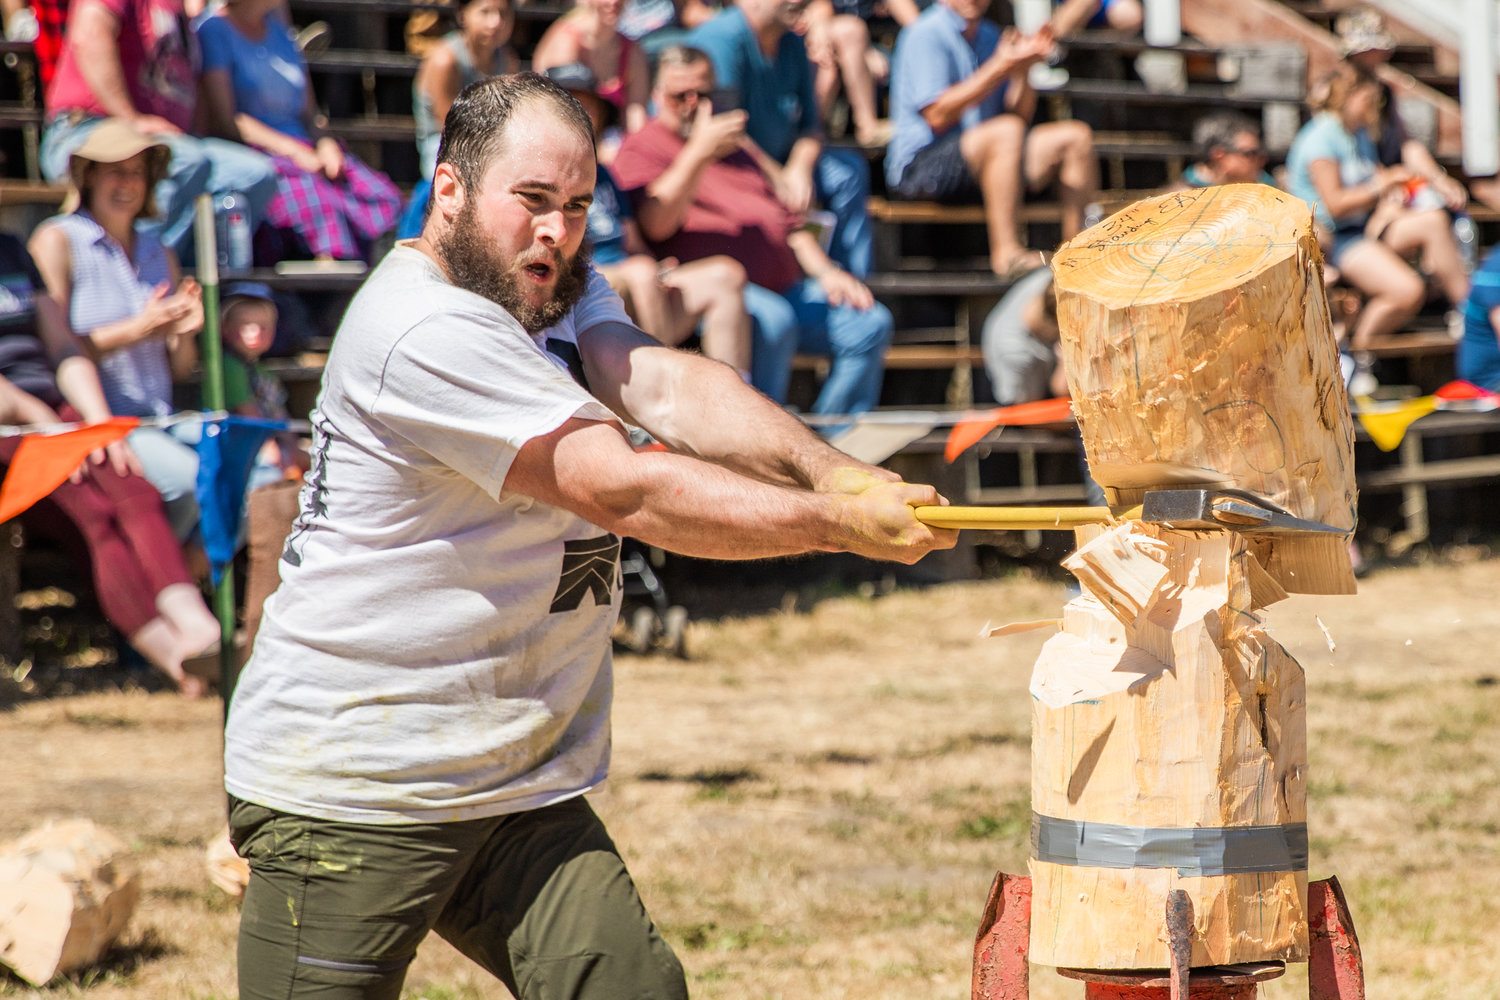 Patrick Mahoney, 30, splits a log in two during the Morton Loggers’ Jubilee on Sunday. Mahoney is an instructor in Grays Harbor College’s bachelor of forest resources program and has been competing in logging events for seven years.